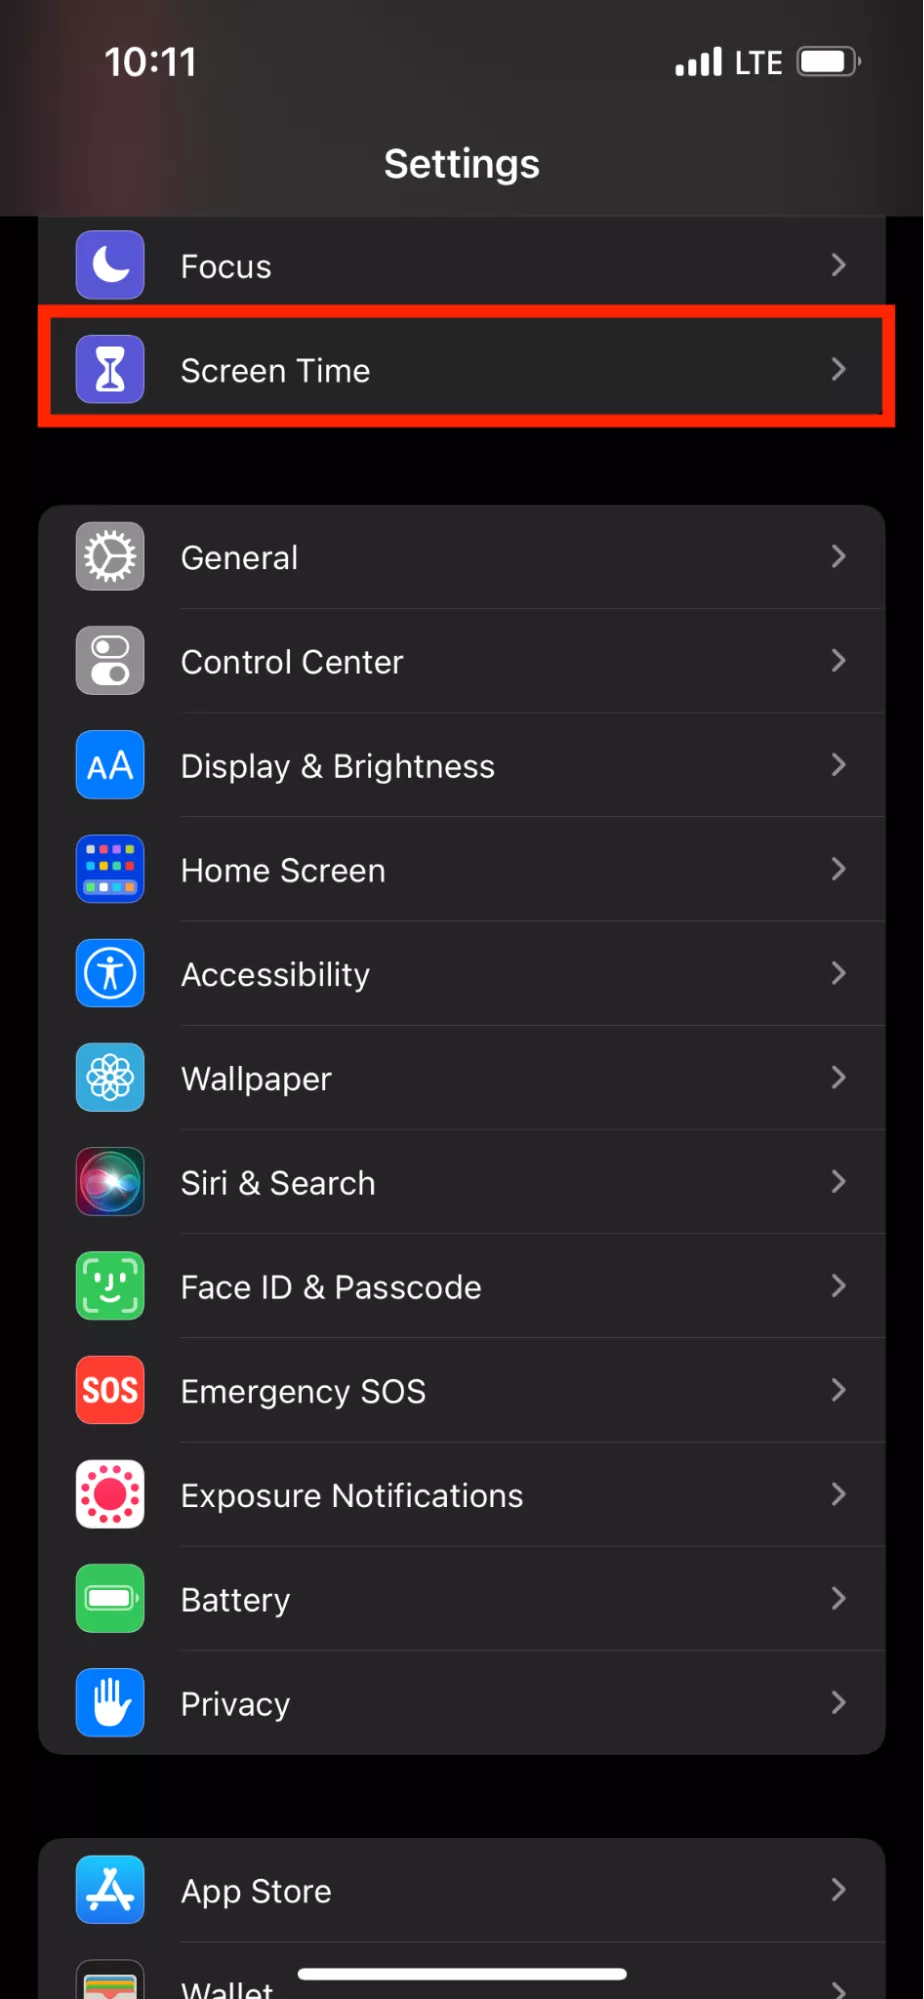 How do I find hidden or missing apps on iPhone?